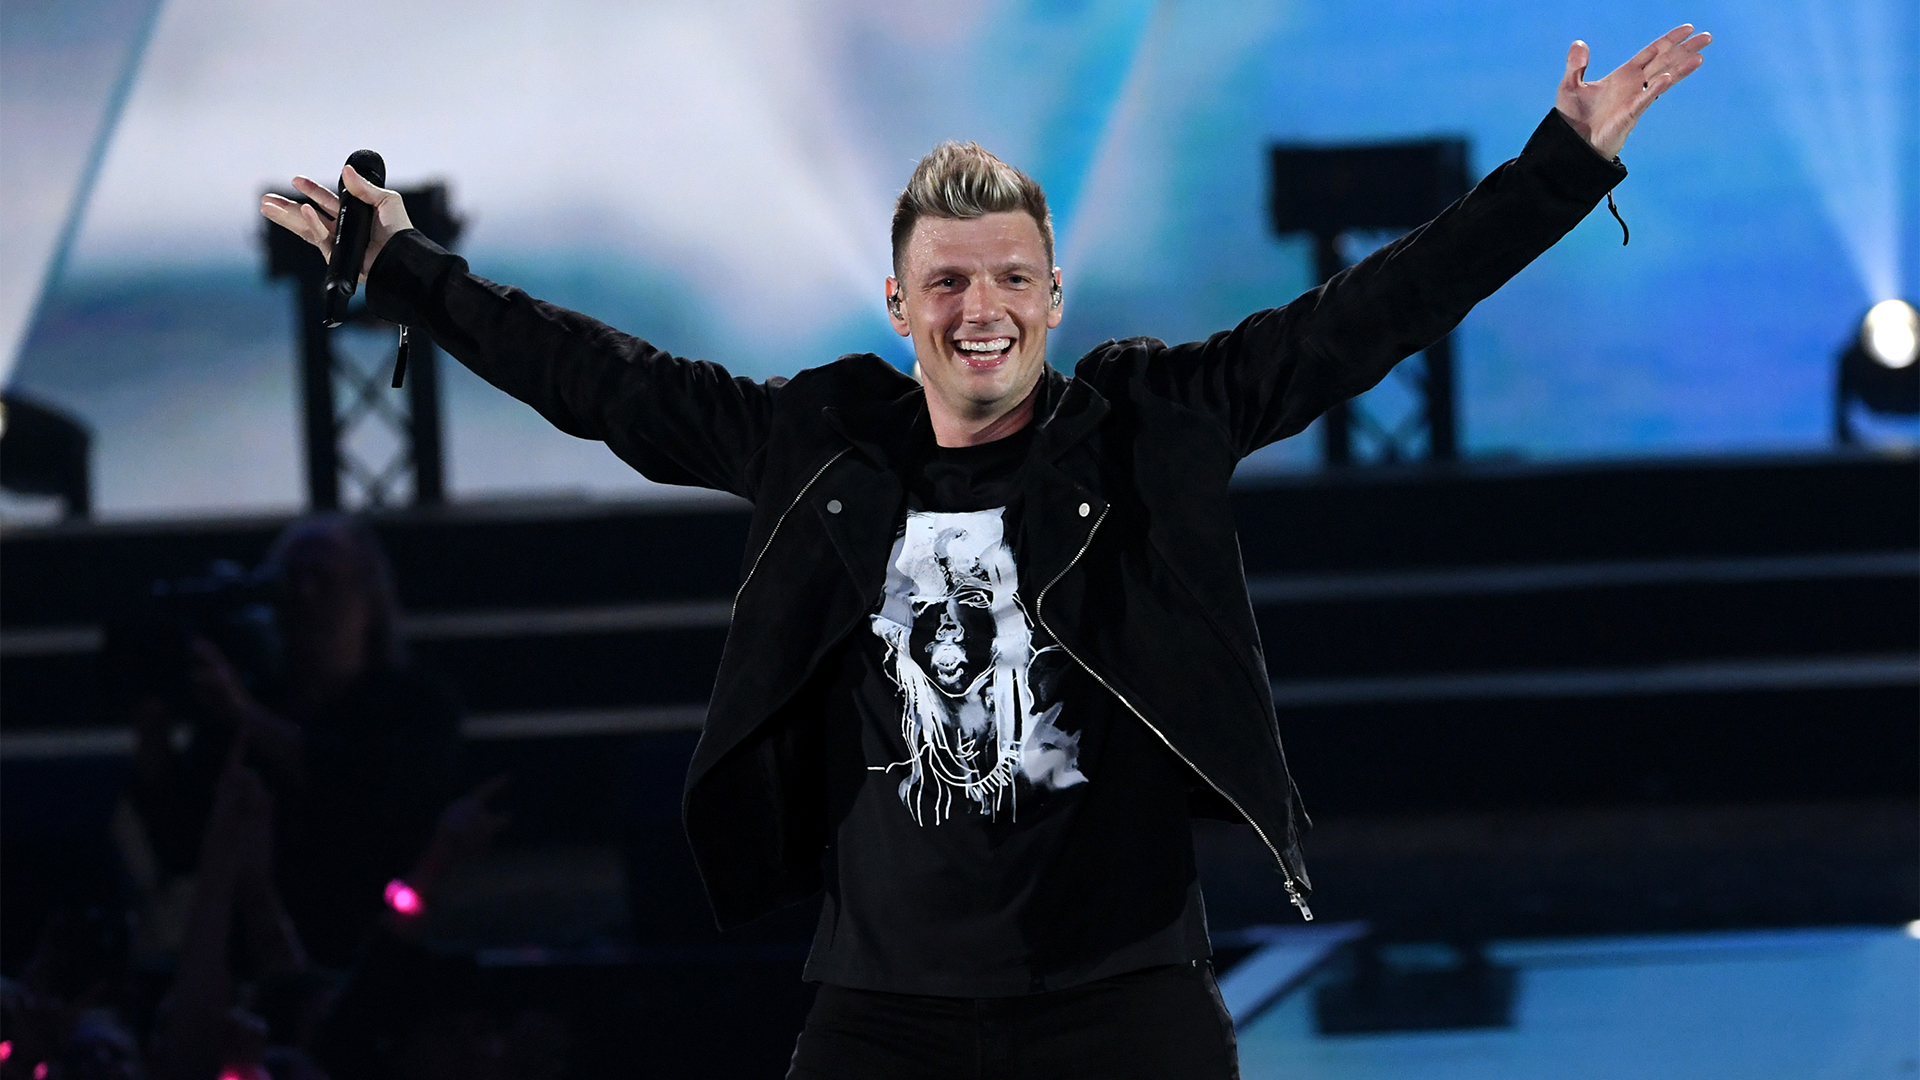 Backstreet Boys' Nick Carter opens up about solo plans, work with children battling cancer Los Angeles